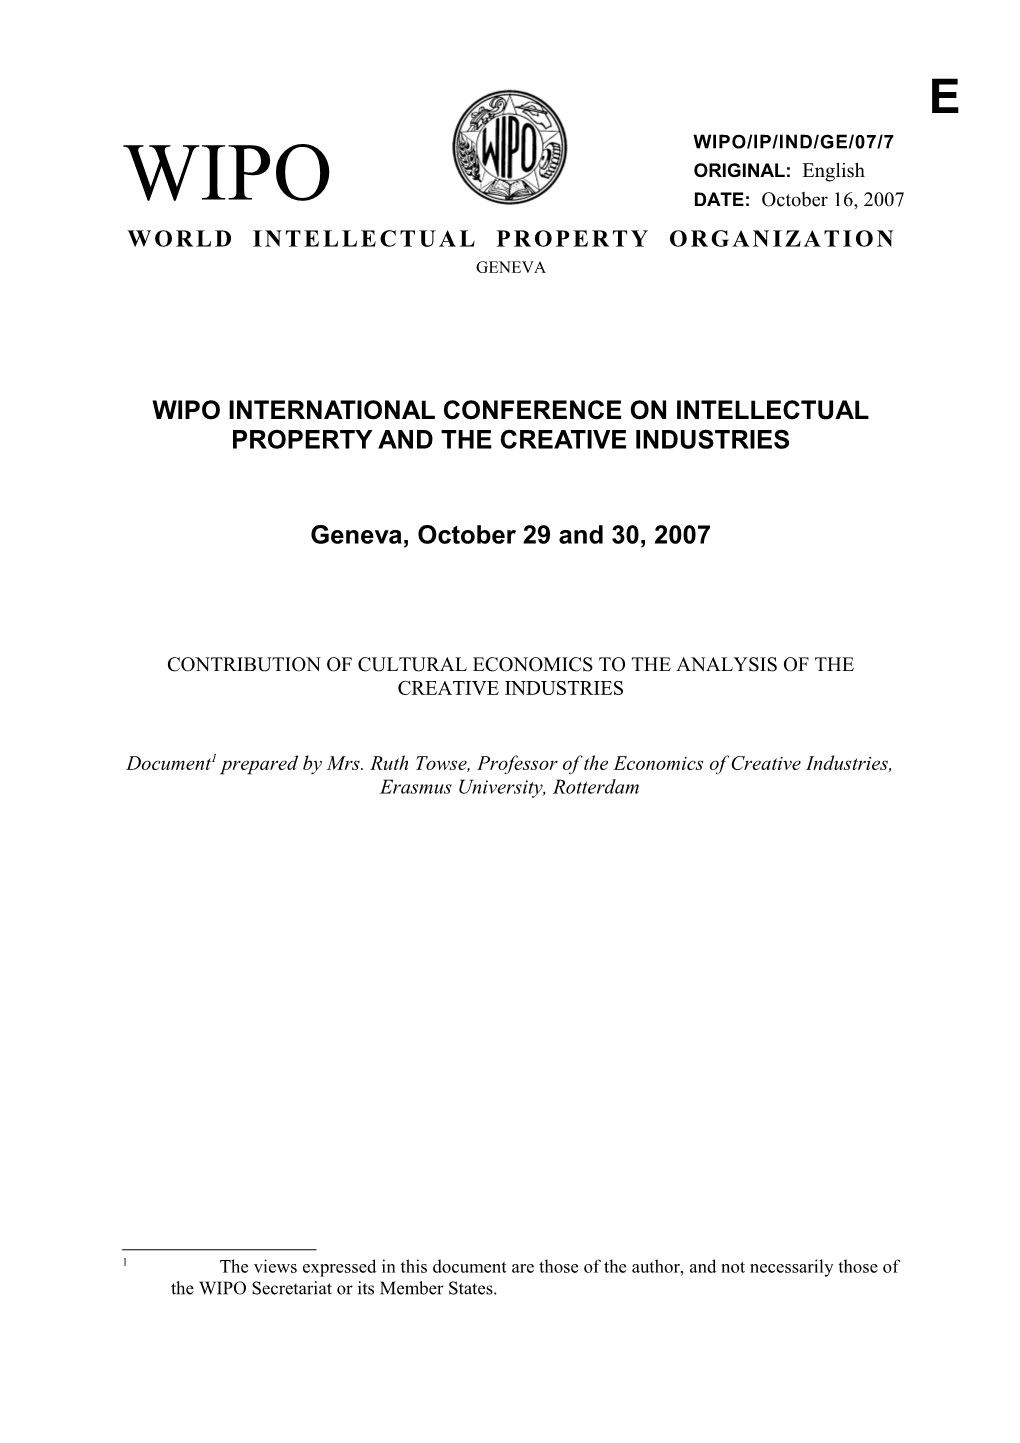 WIPO/IP/IND/GE/07/7: Contribution of Cultural Economics to the Analysis of the Creative